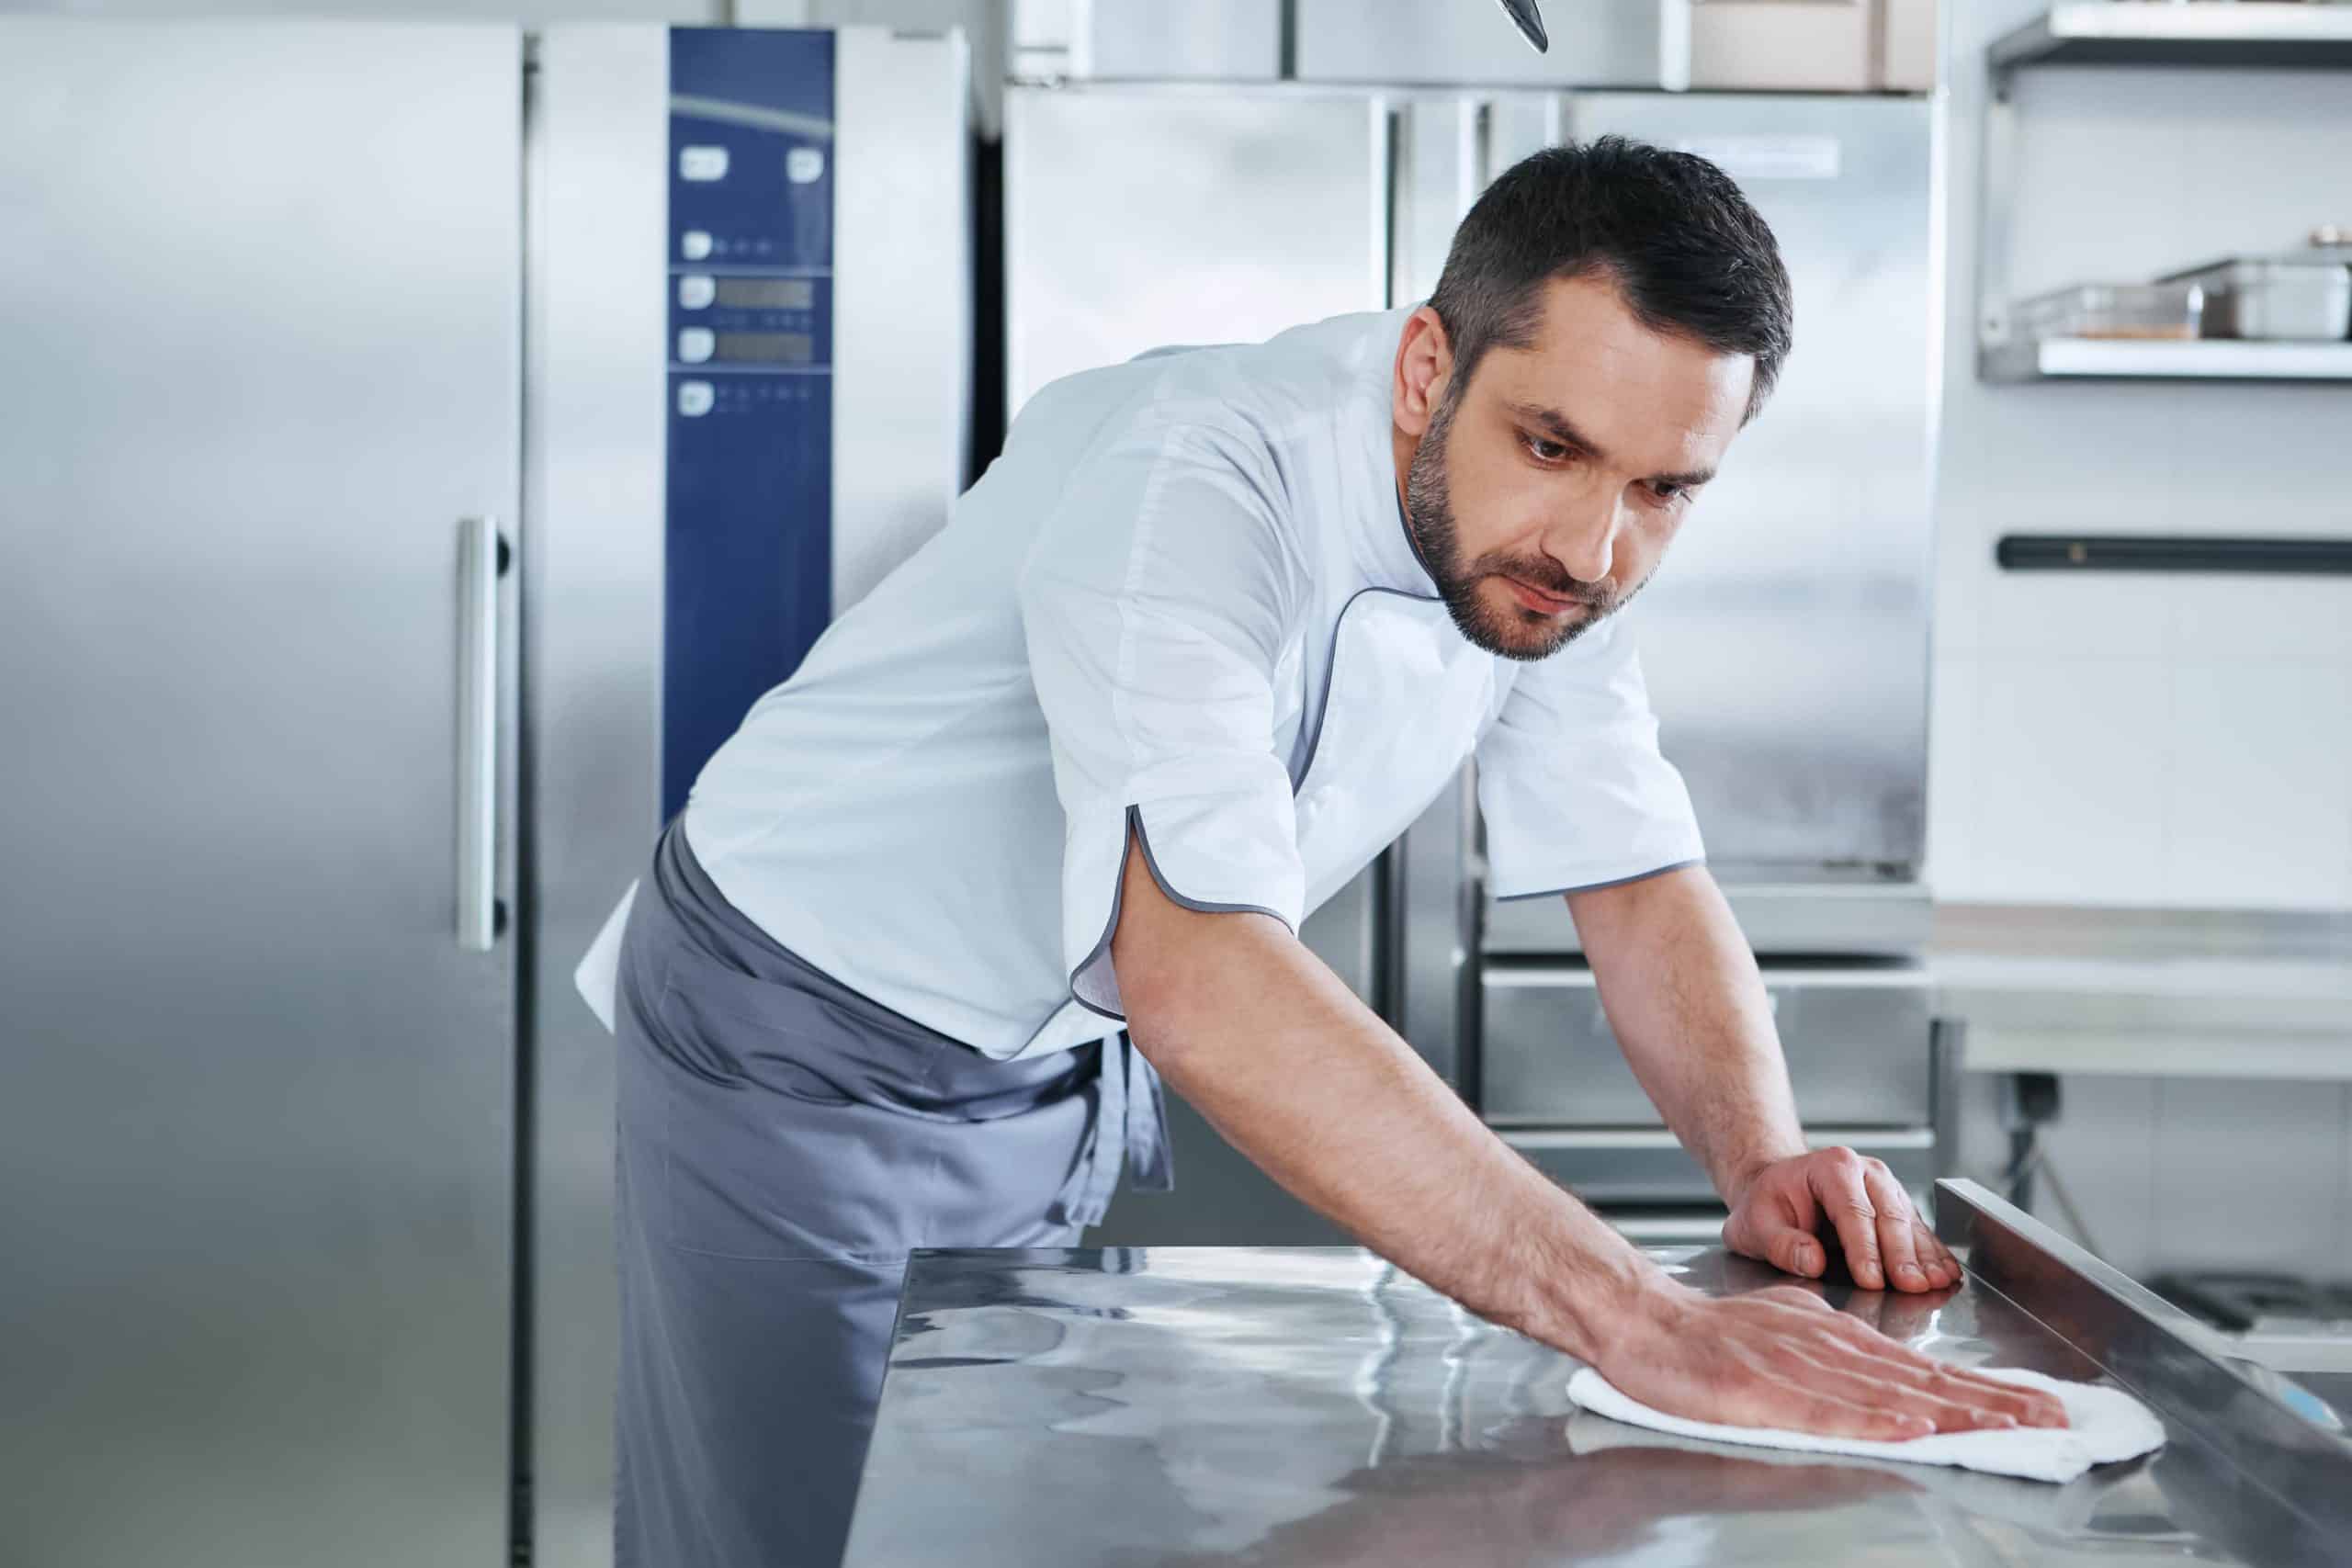 Cleaning Commercial kitchen